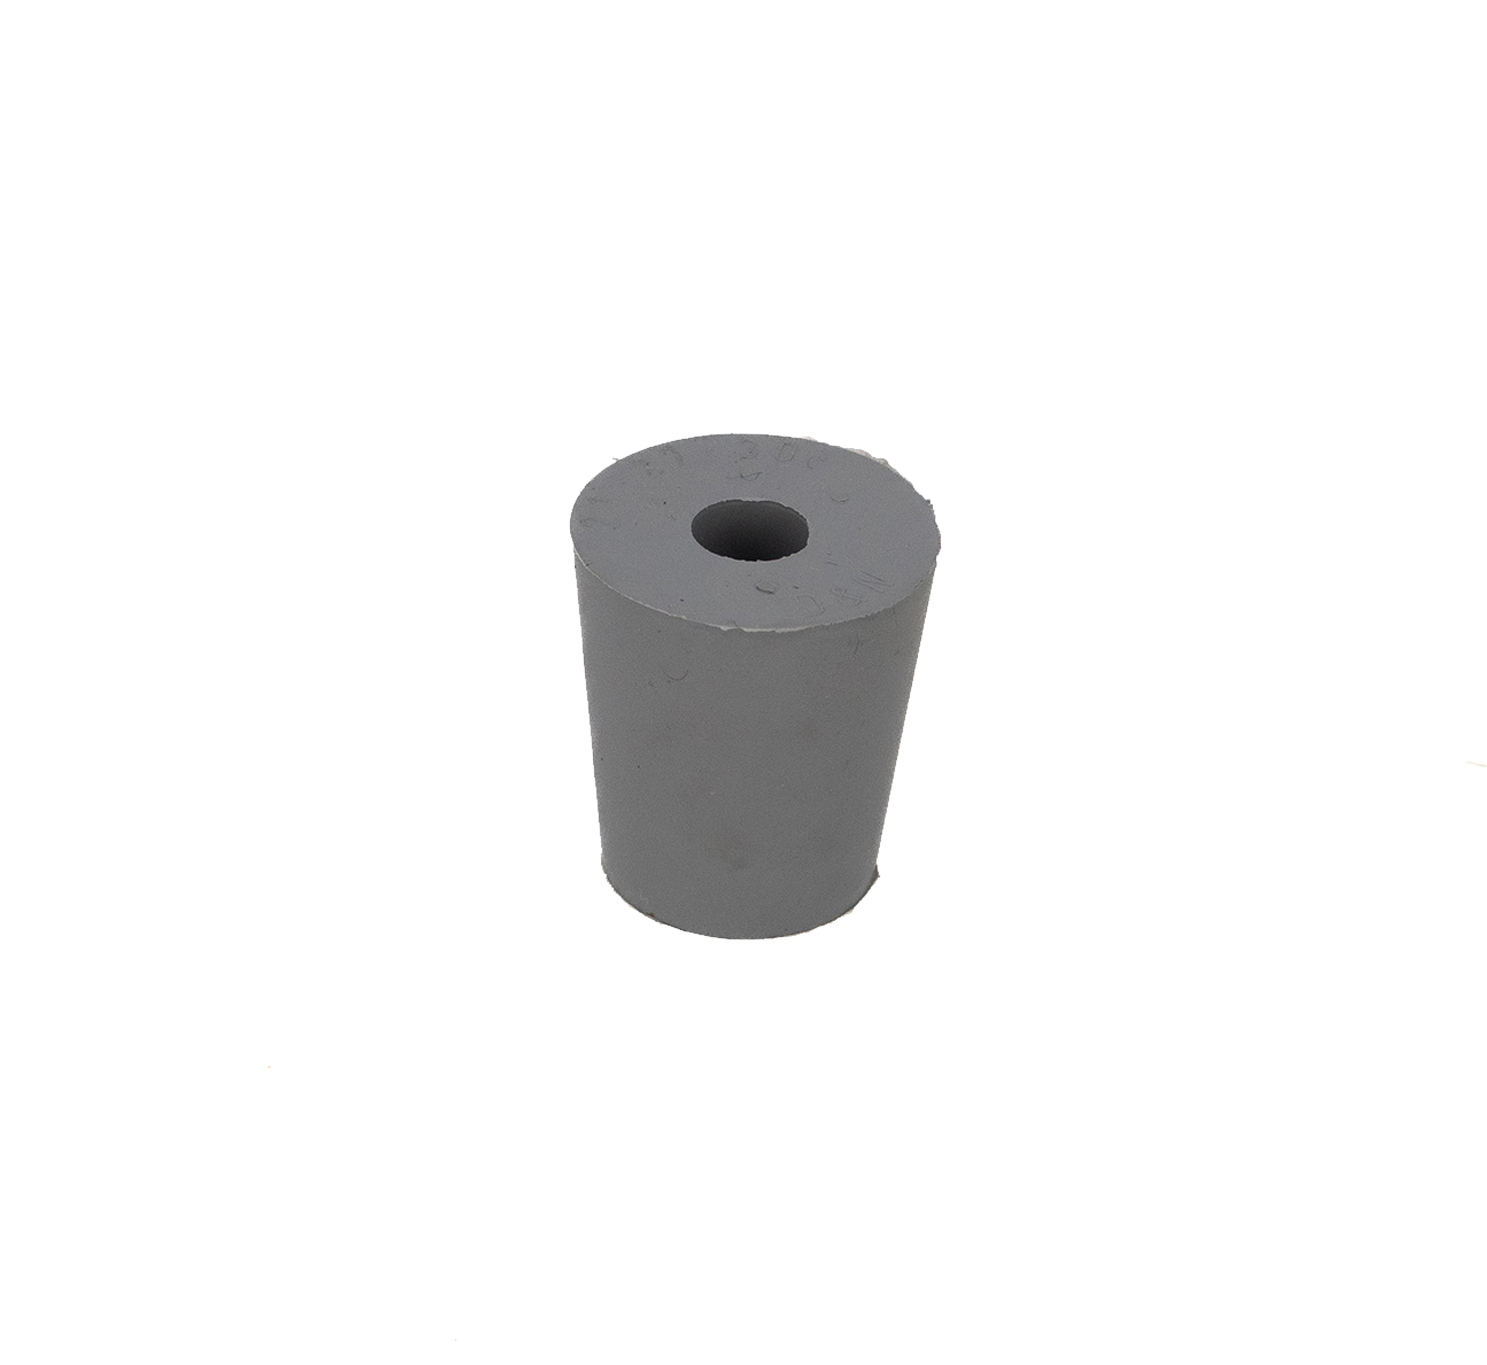 Rubber stopper grey 21 x 27 mm with hole 9 mm